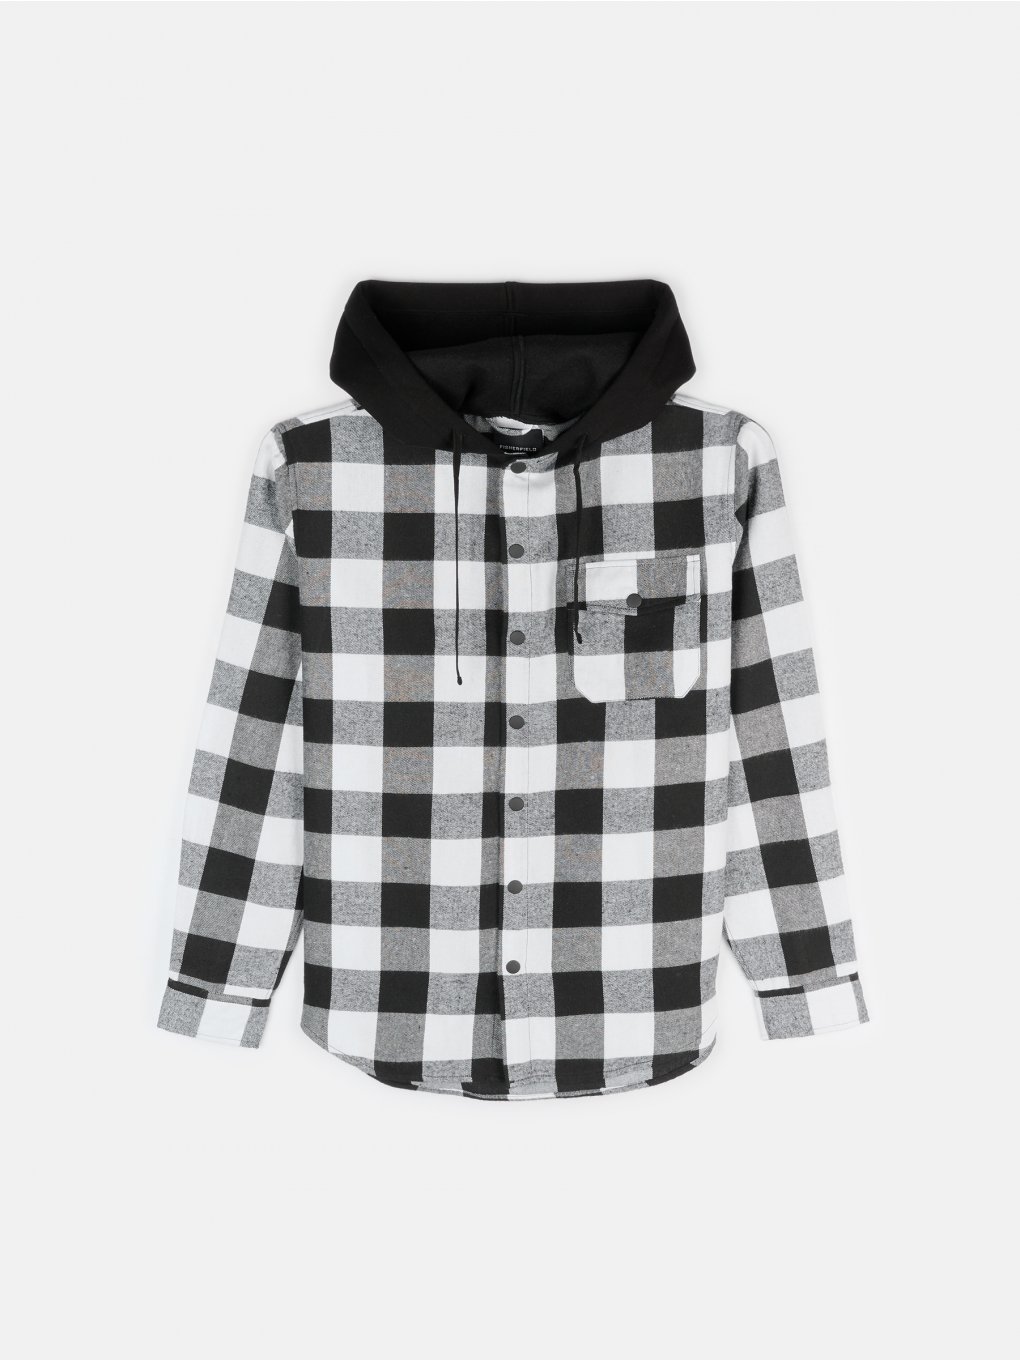 Plaid flannel shirt with hood